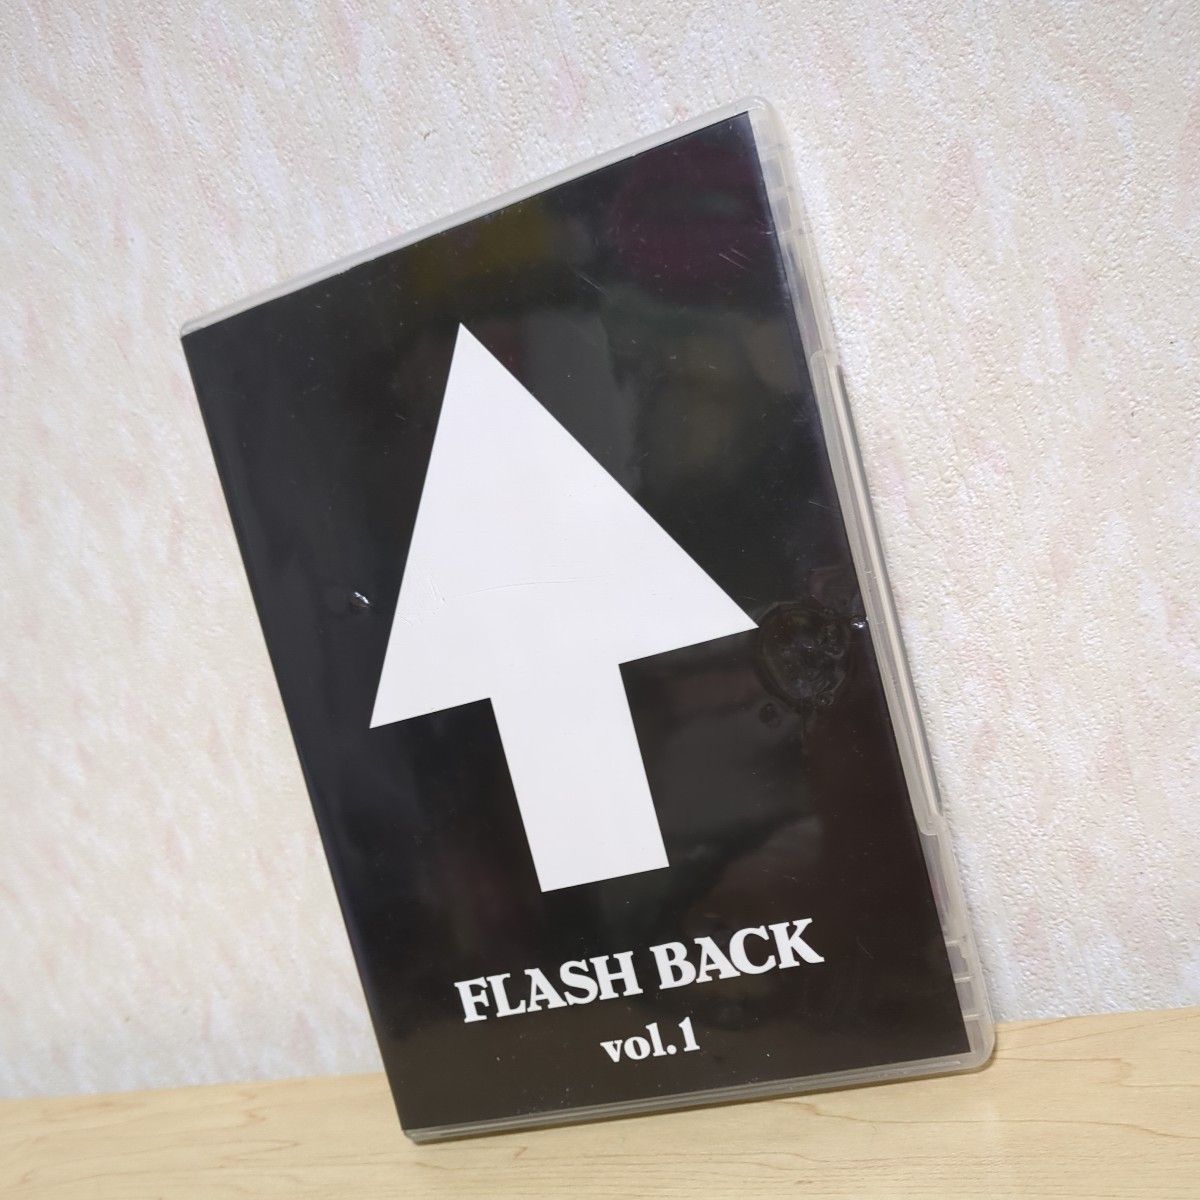 FLASH BACK vol.1 DVD THE HIGH-LOWS ザハイロウズ　動作確認済み